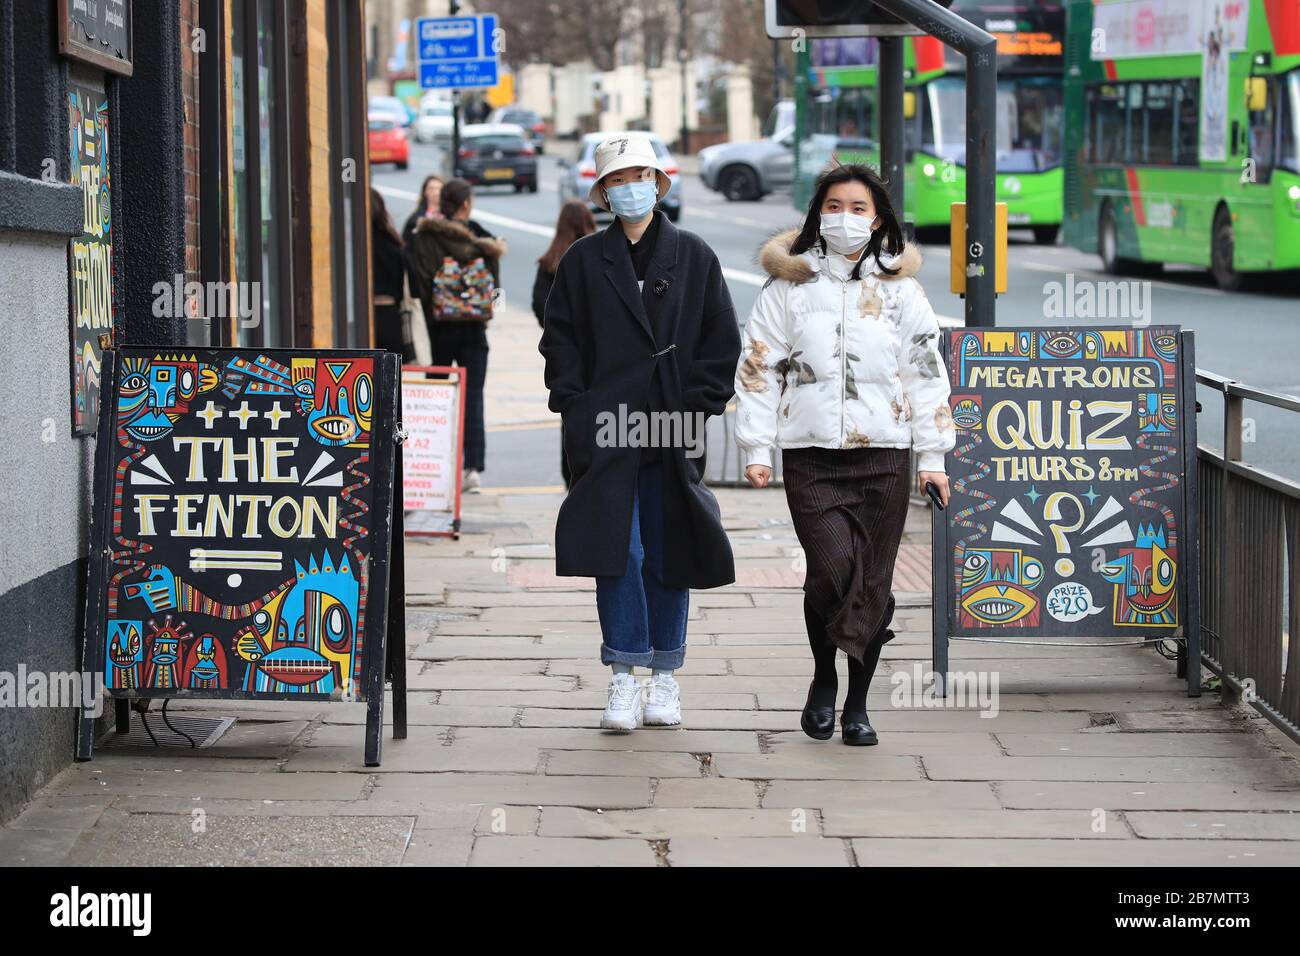 People wearing face mask in Leeds, West Yorkshire, the day after Prime Minister Boris Johnson called on people to stay away from pubs, clubs and theatres, work from home if possible and avoid all non-essential contacts and travel in order to reduce the impact of the coronavirus pandemic. Stock Photo